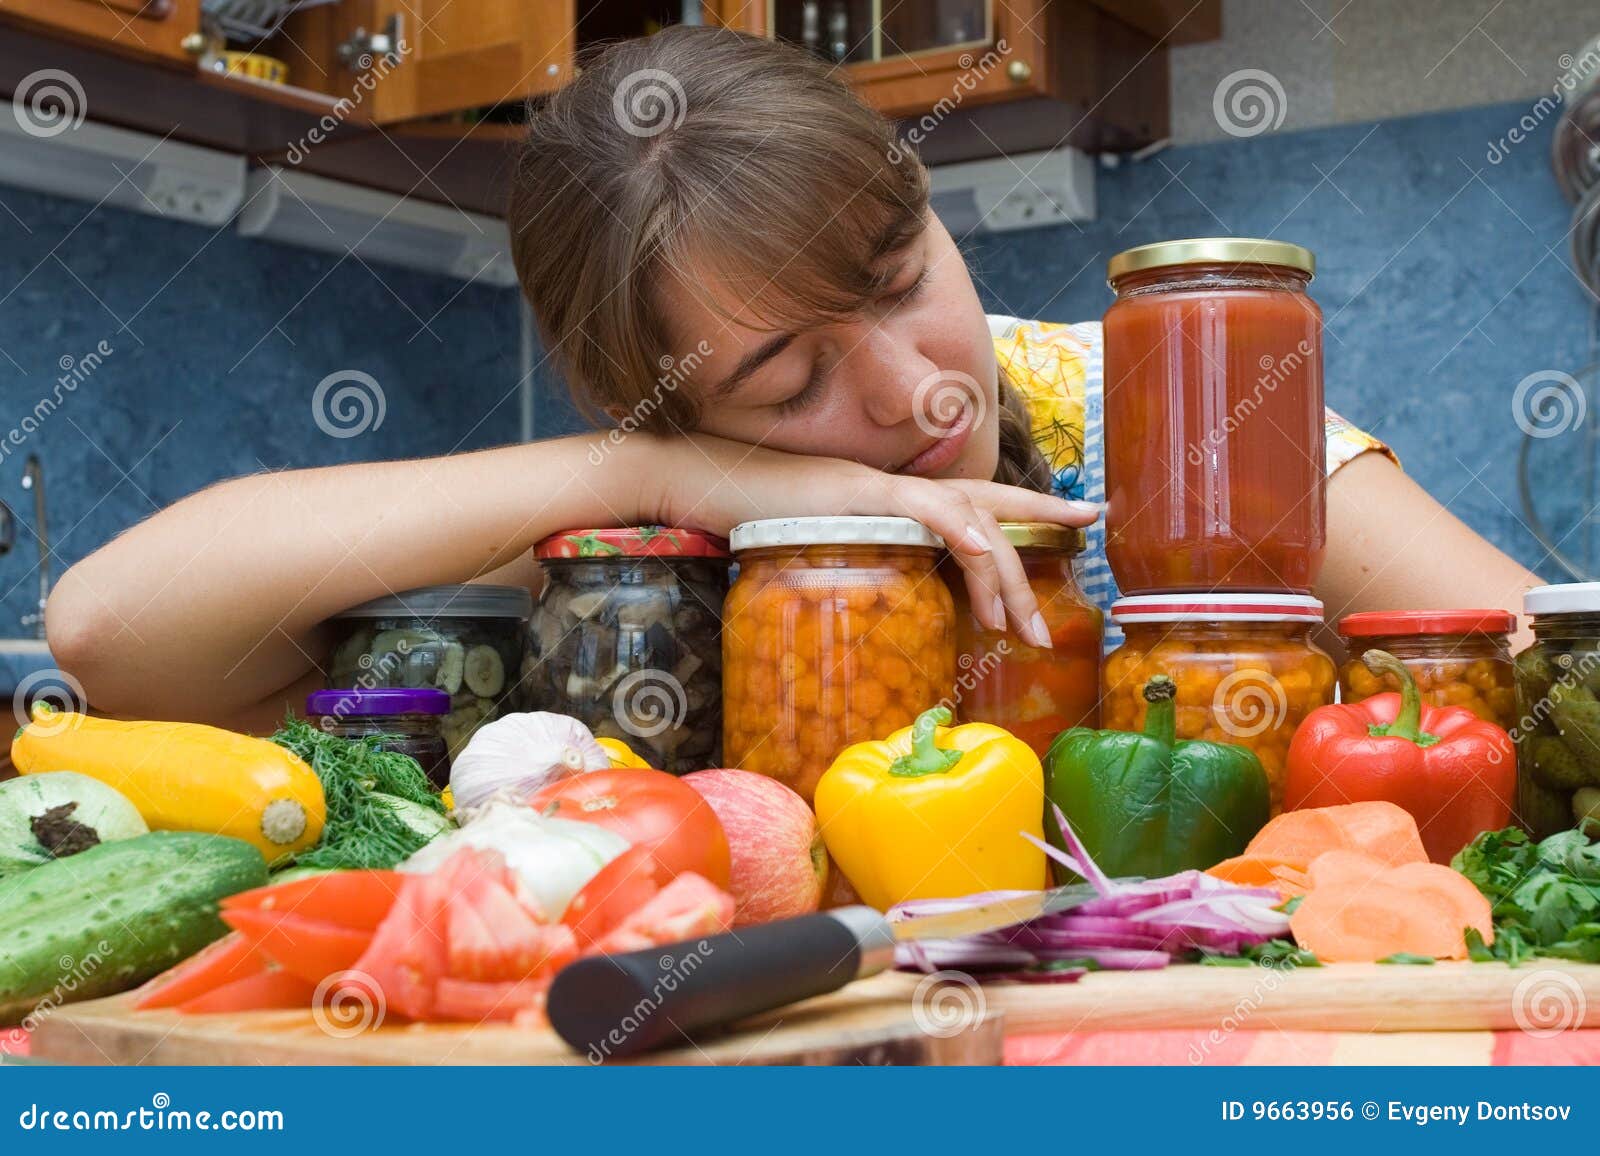 Girl with vegetables stock photo. Image of ingredient - 9663956